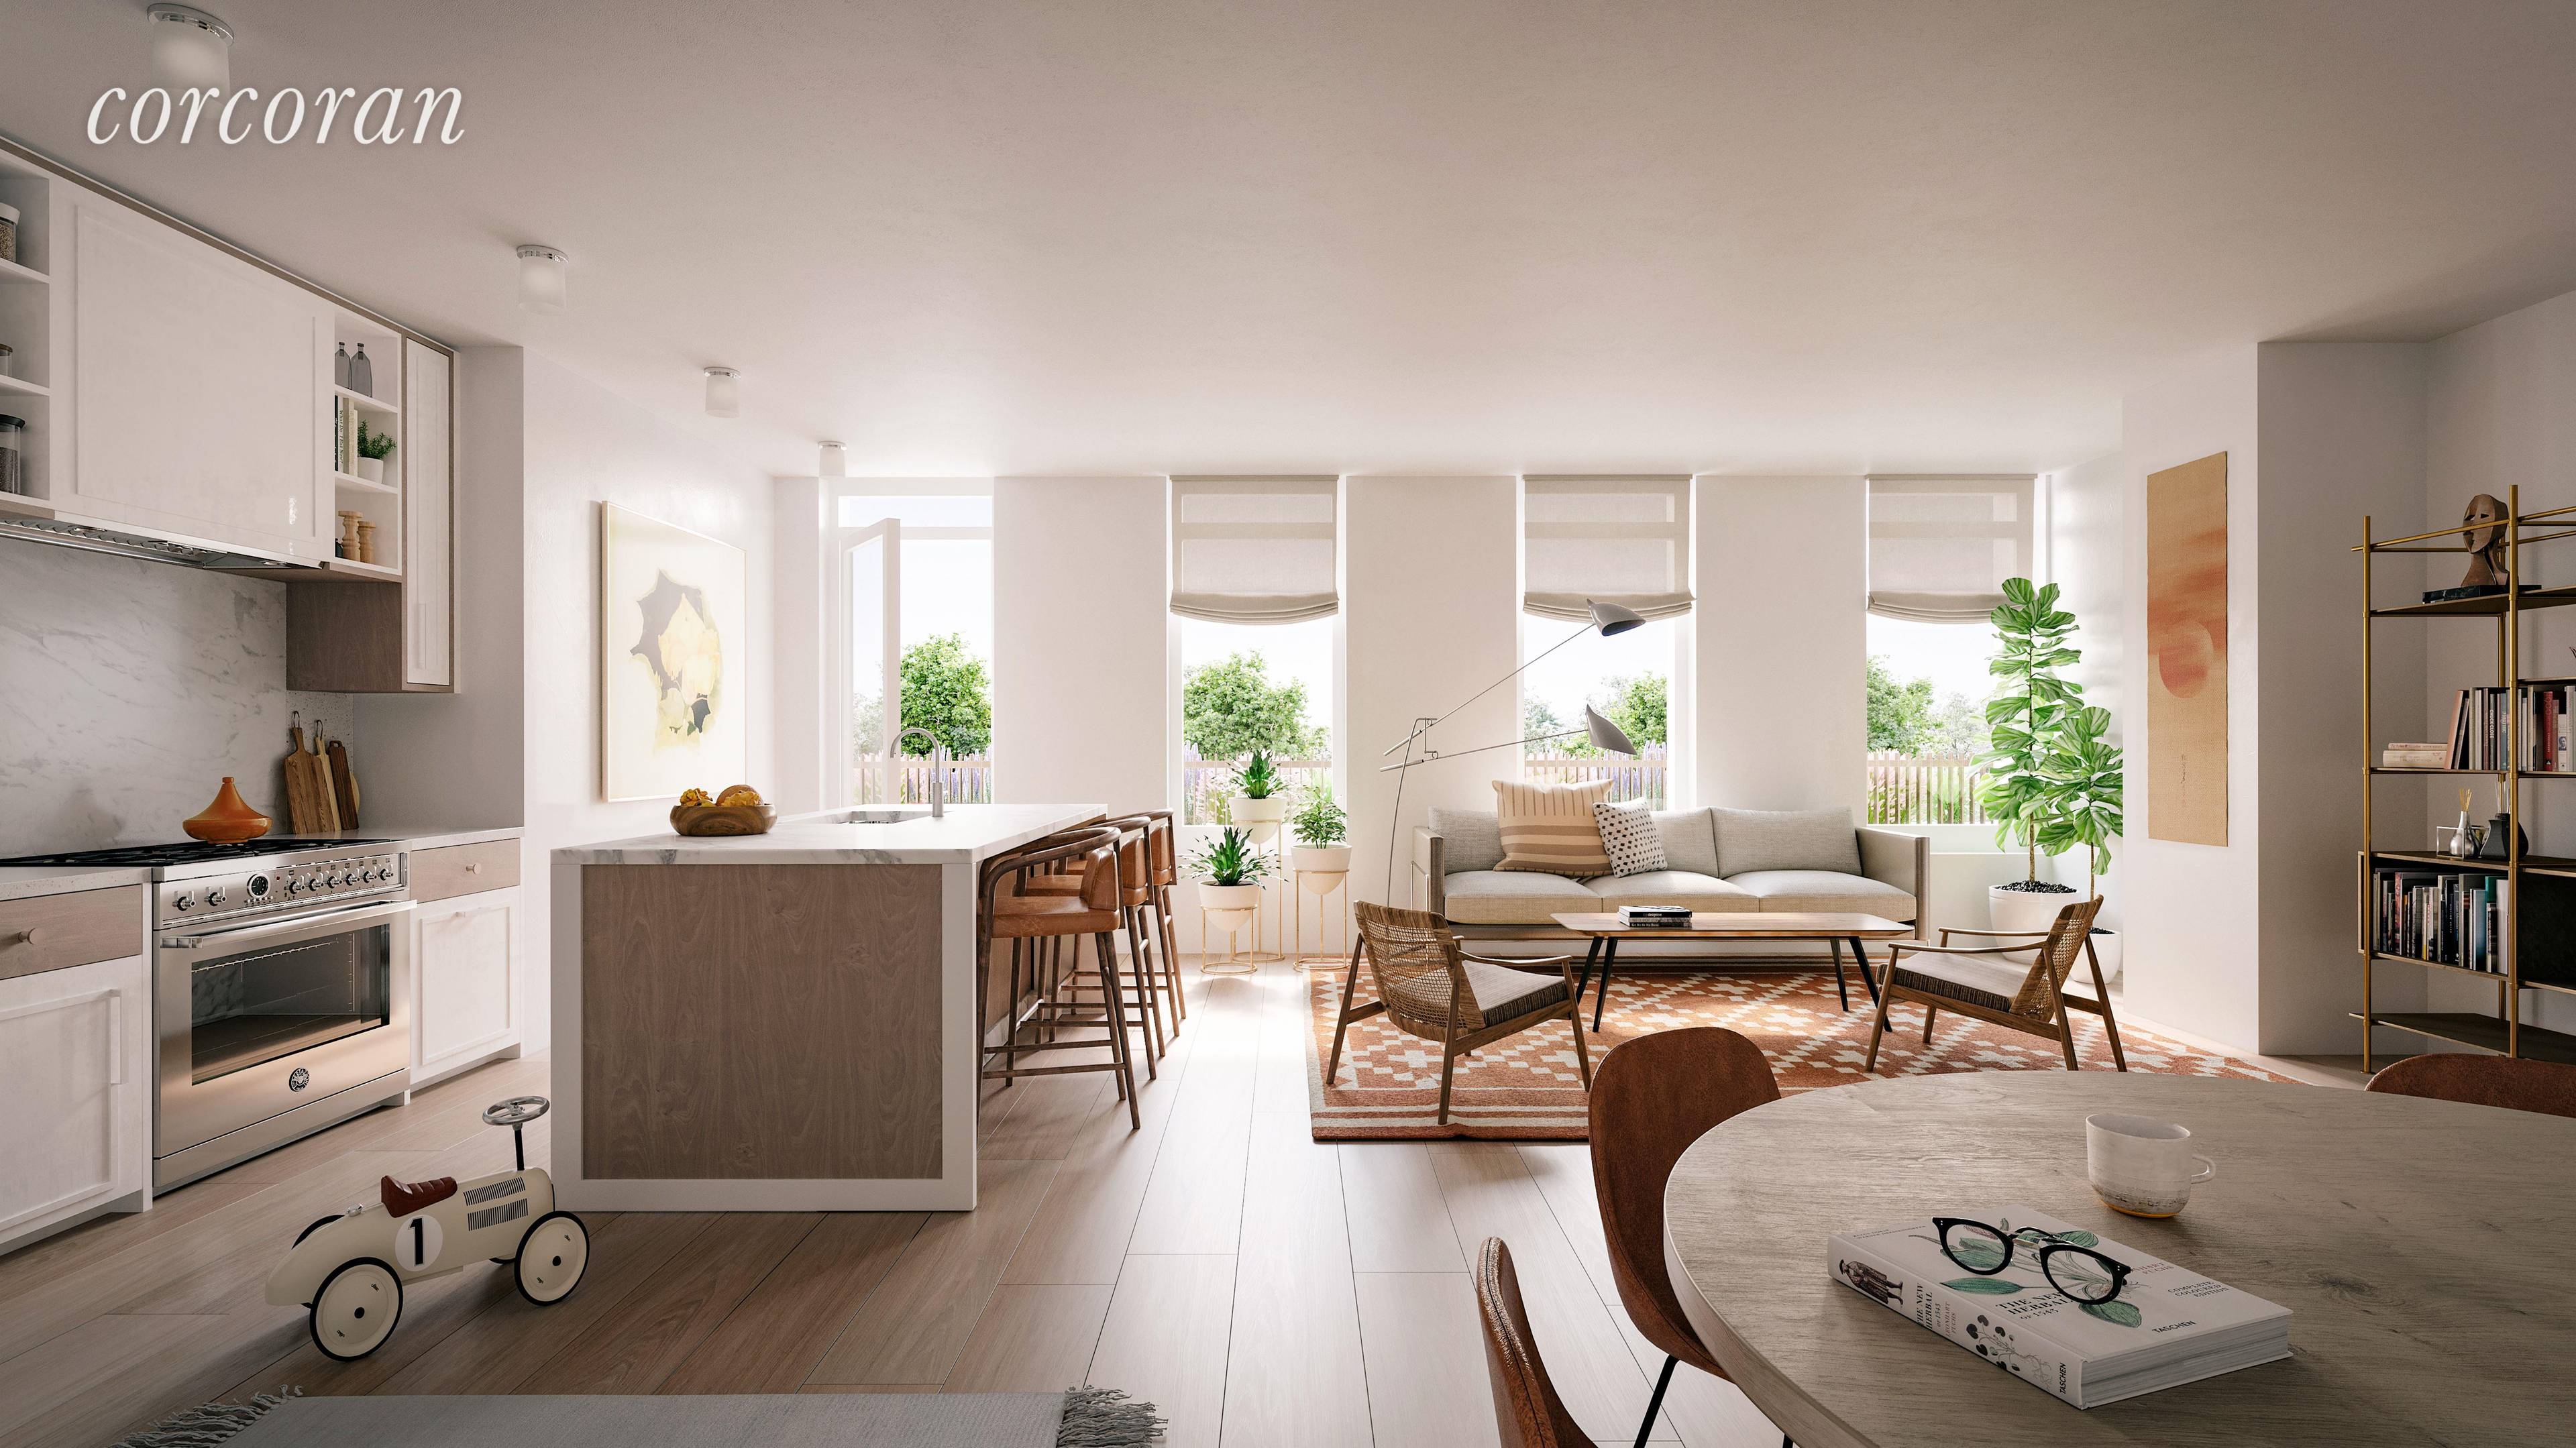 One Clinton is a collection of 134 modern homes inspired by the historic and graceful surroundings of Brooklyn Heights.